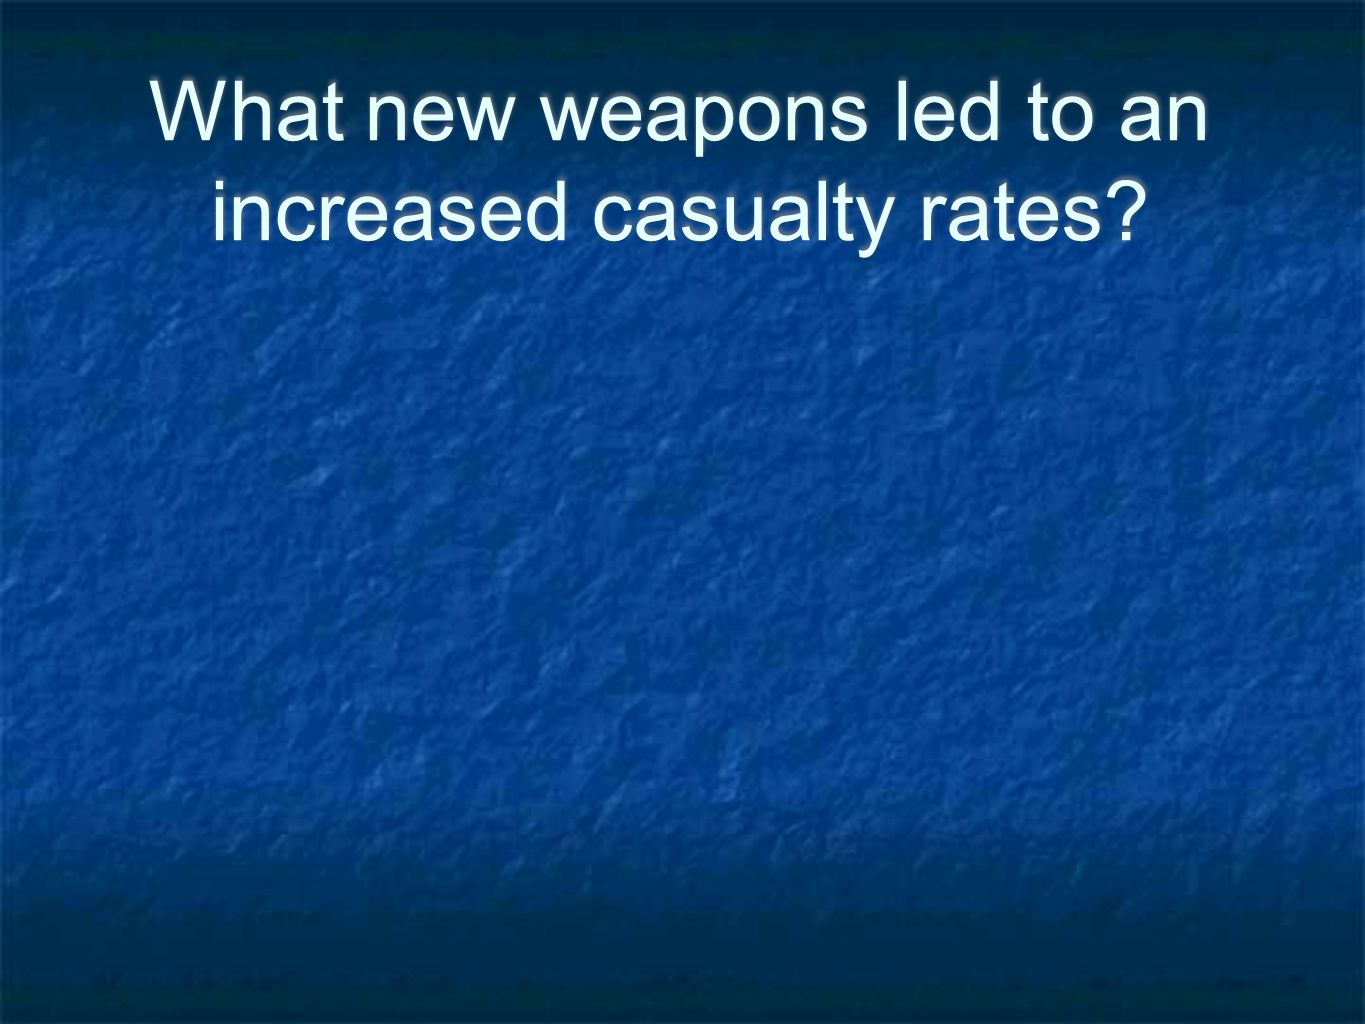 What new weapons led to an increased casualty rates